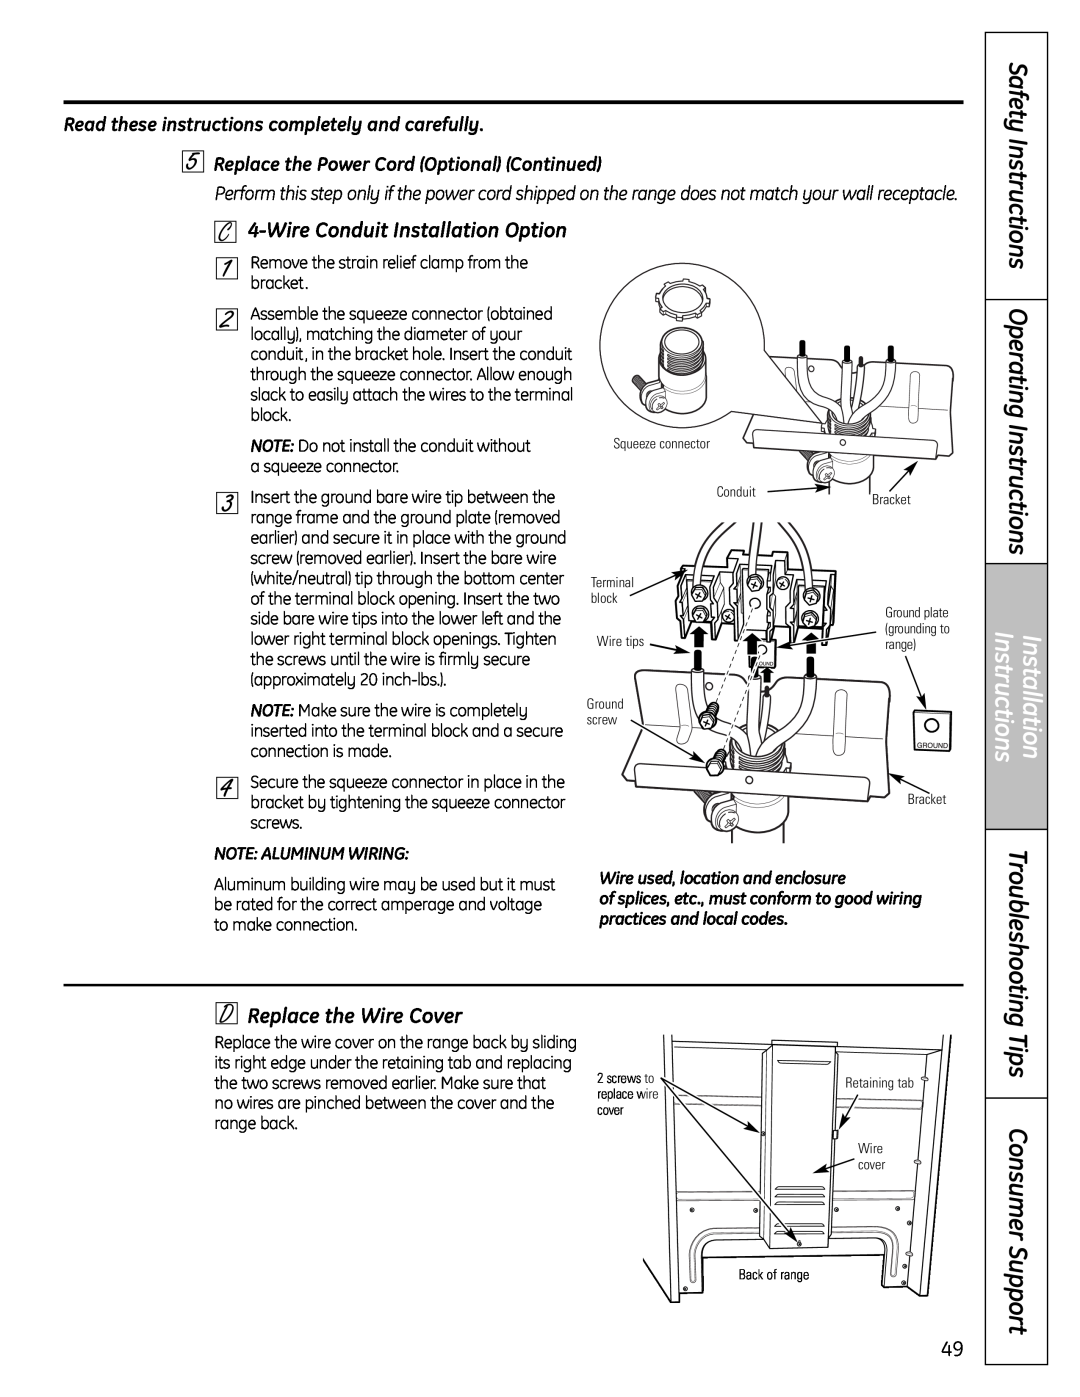 GE 04-09 JR Tips Consumer, Safety Instructions, WireConduit Installation Option, Troubleshooting, Replace the Wire Cover 